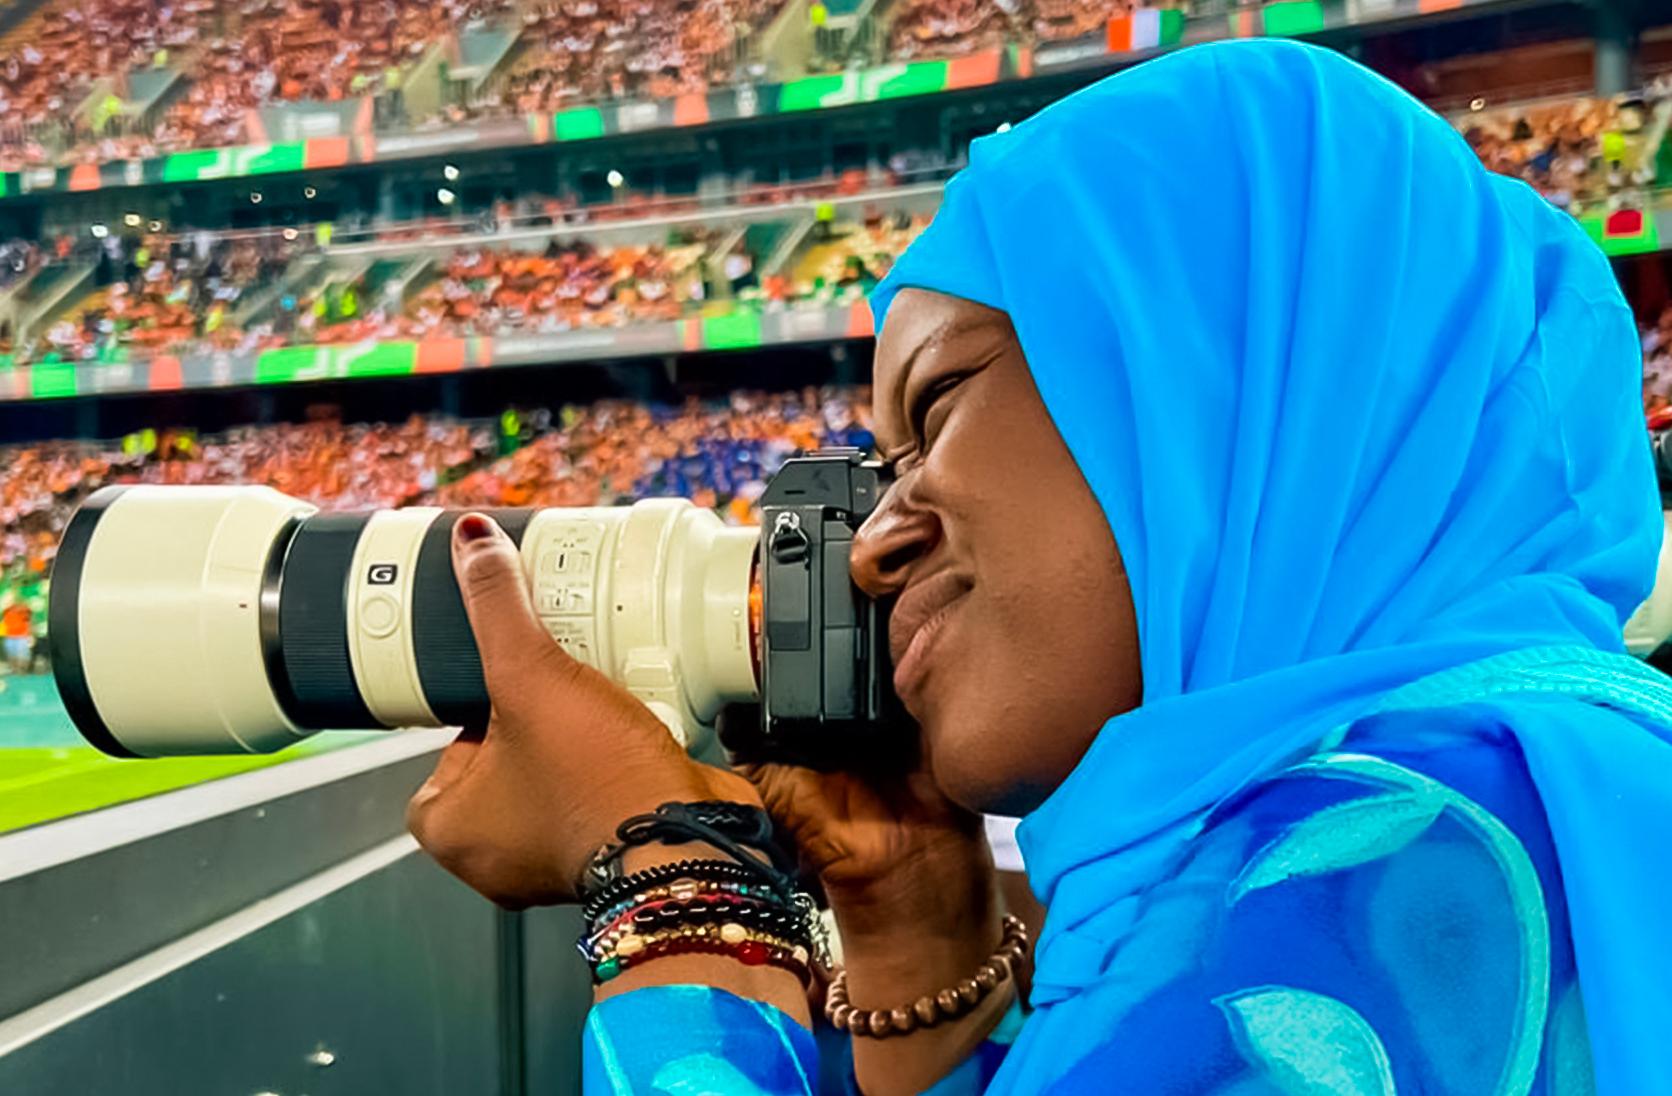 Shifting focus to these photographers in action at the 2023 Africa Cup of Nations